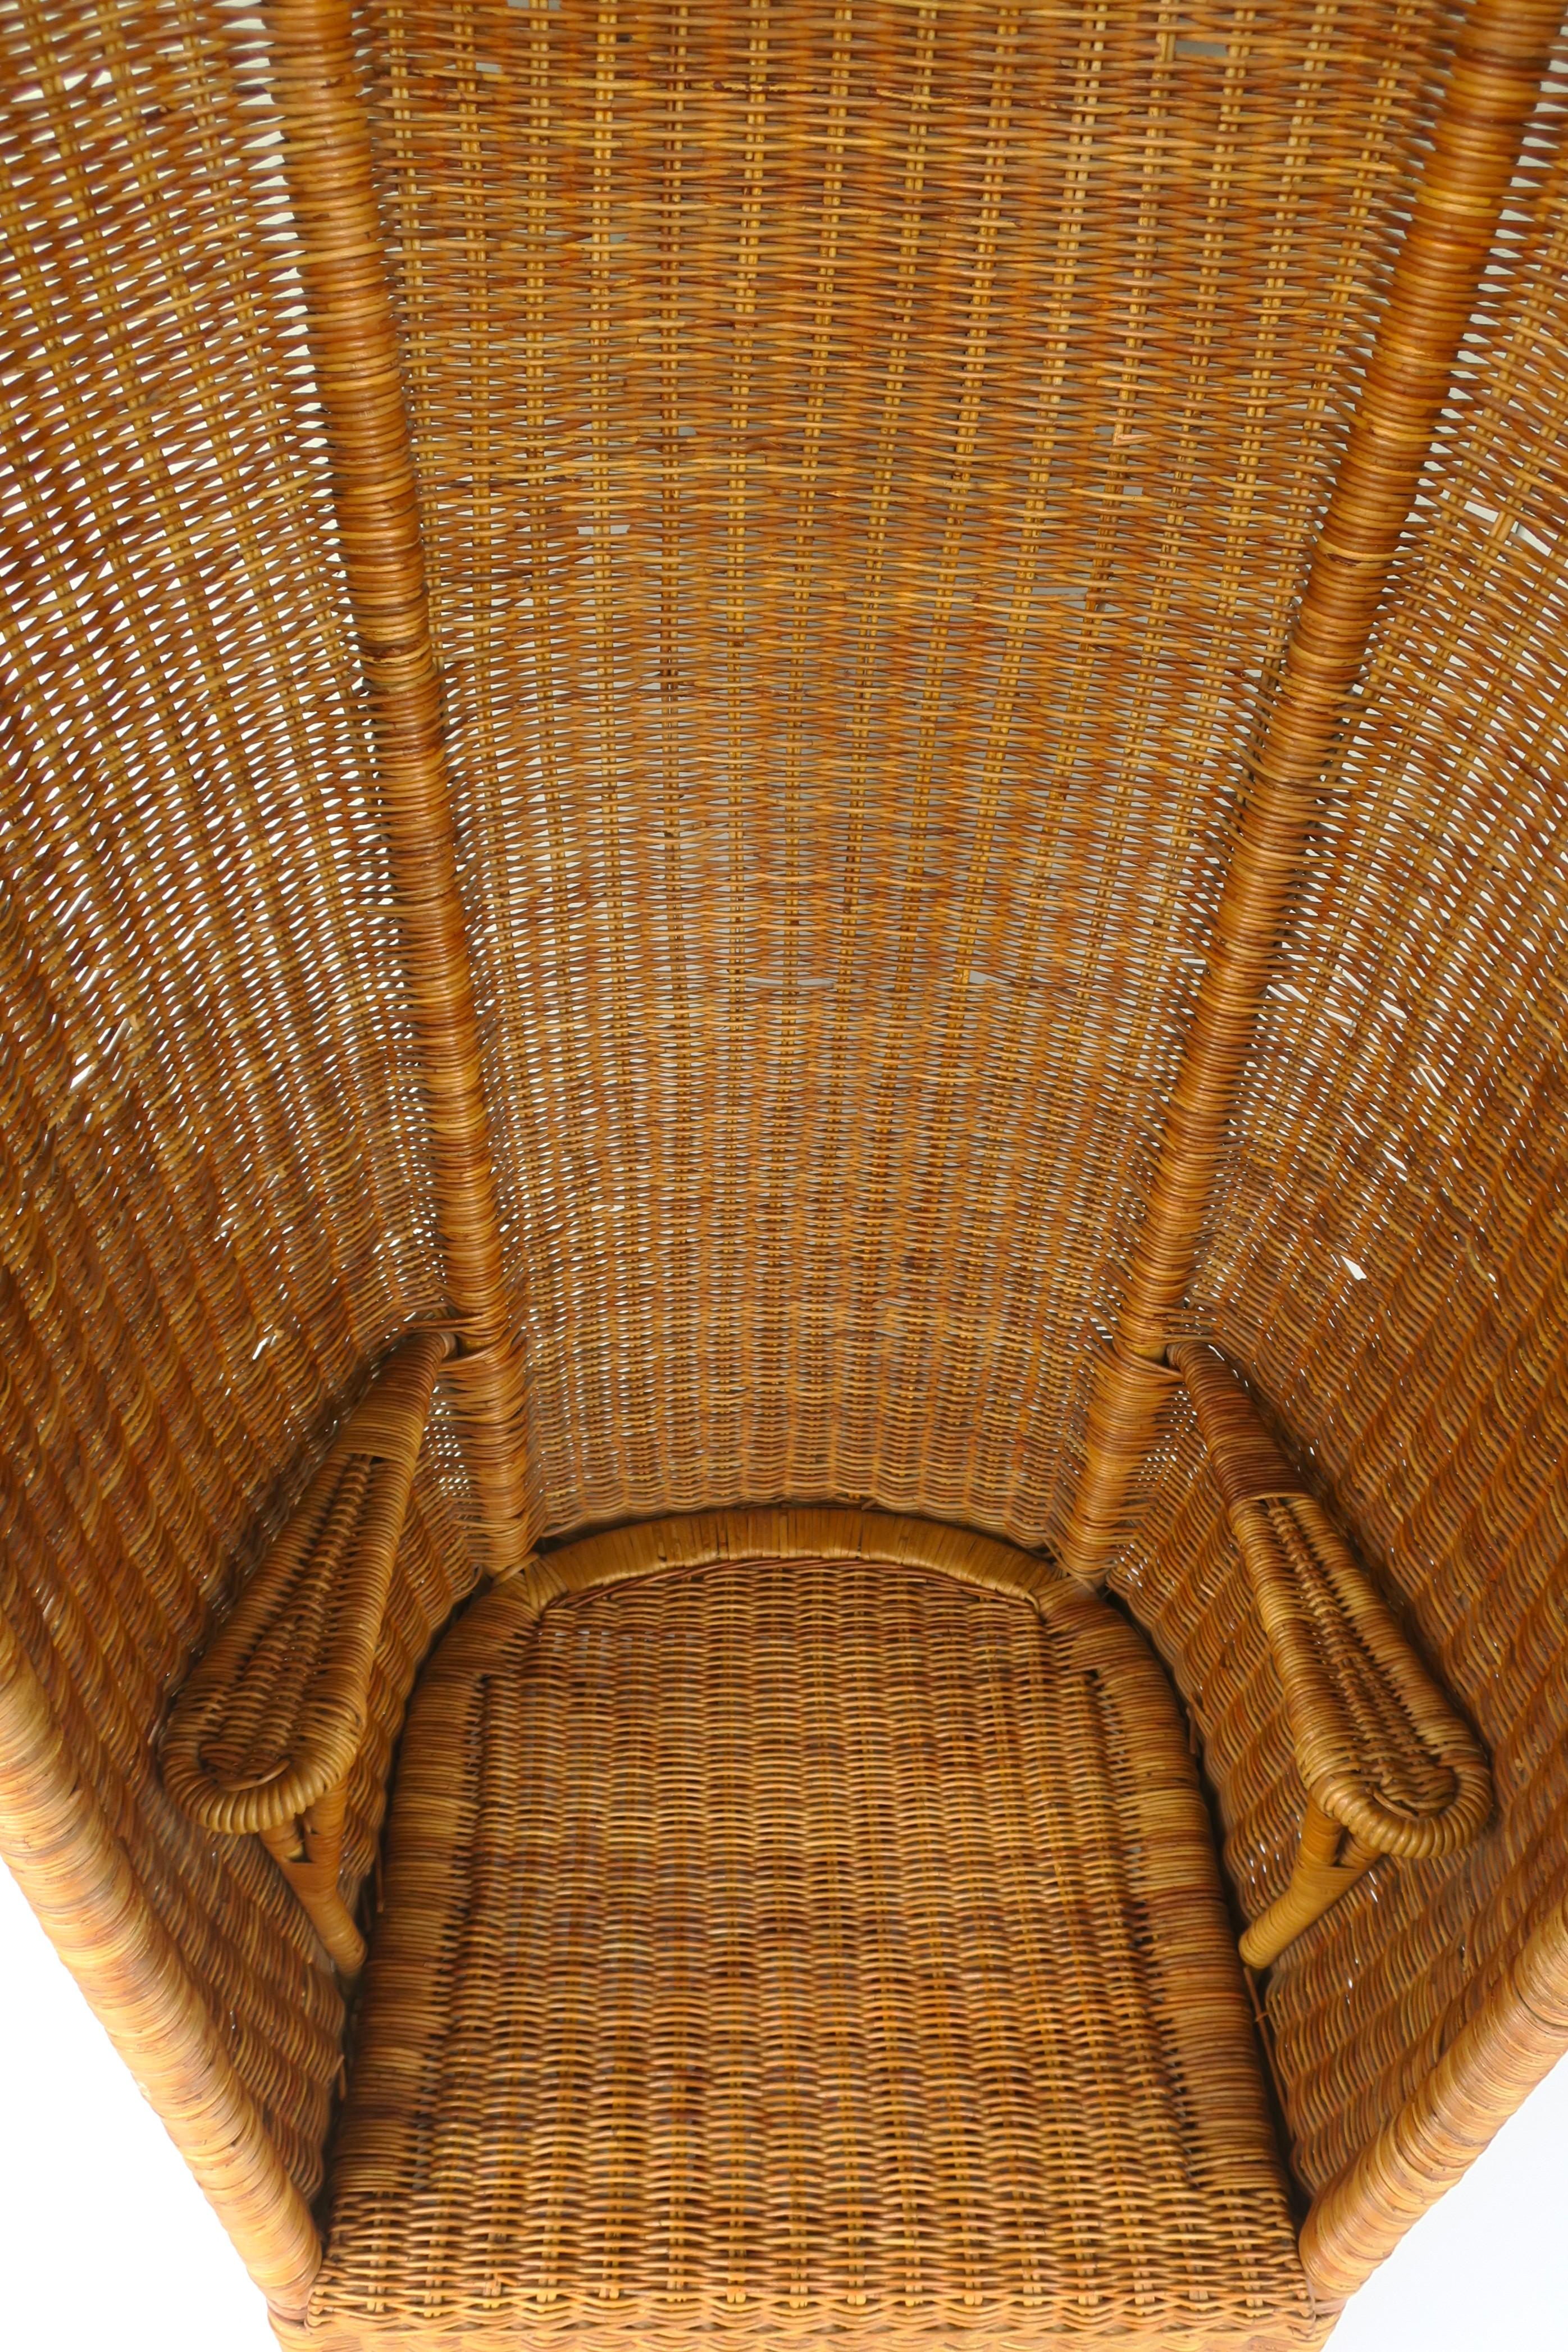 Tall Wicker Canopy Chair Bohemian 1970s For Sale 1